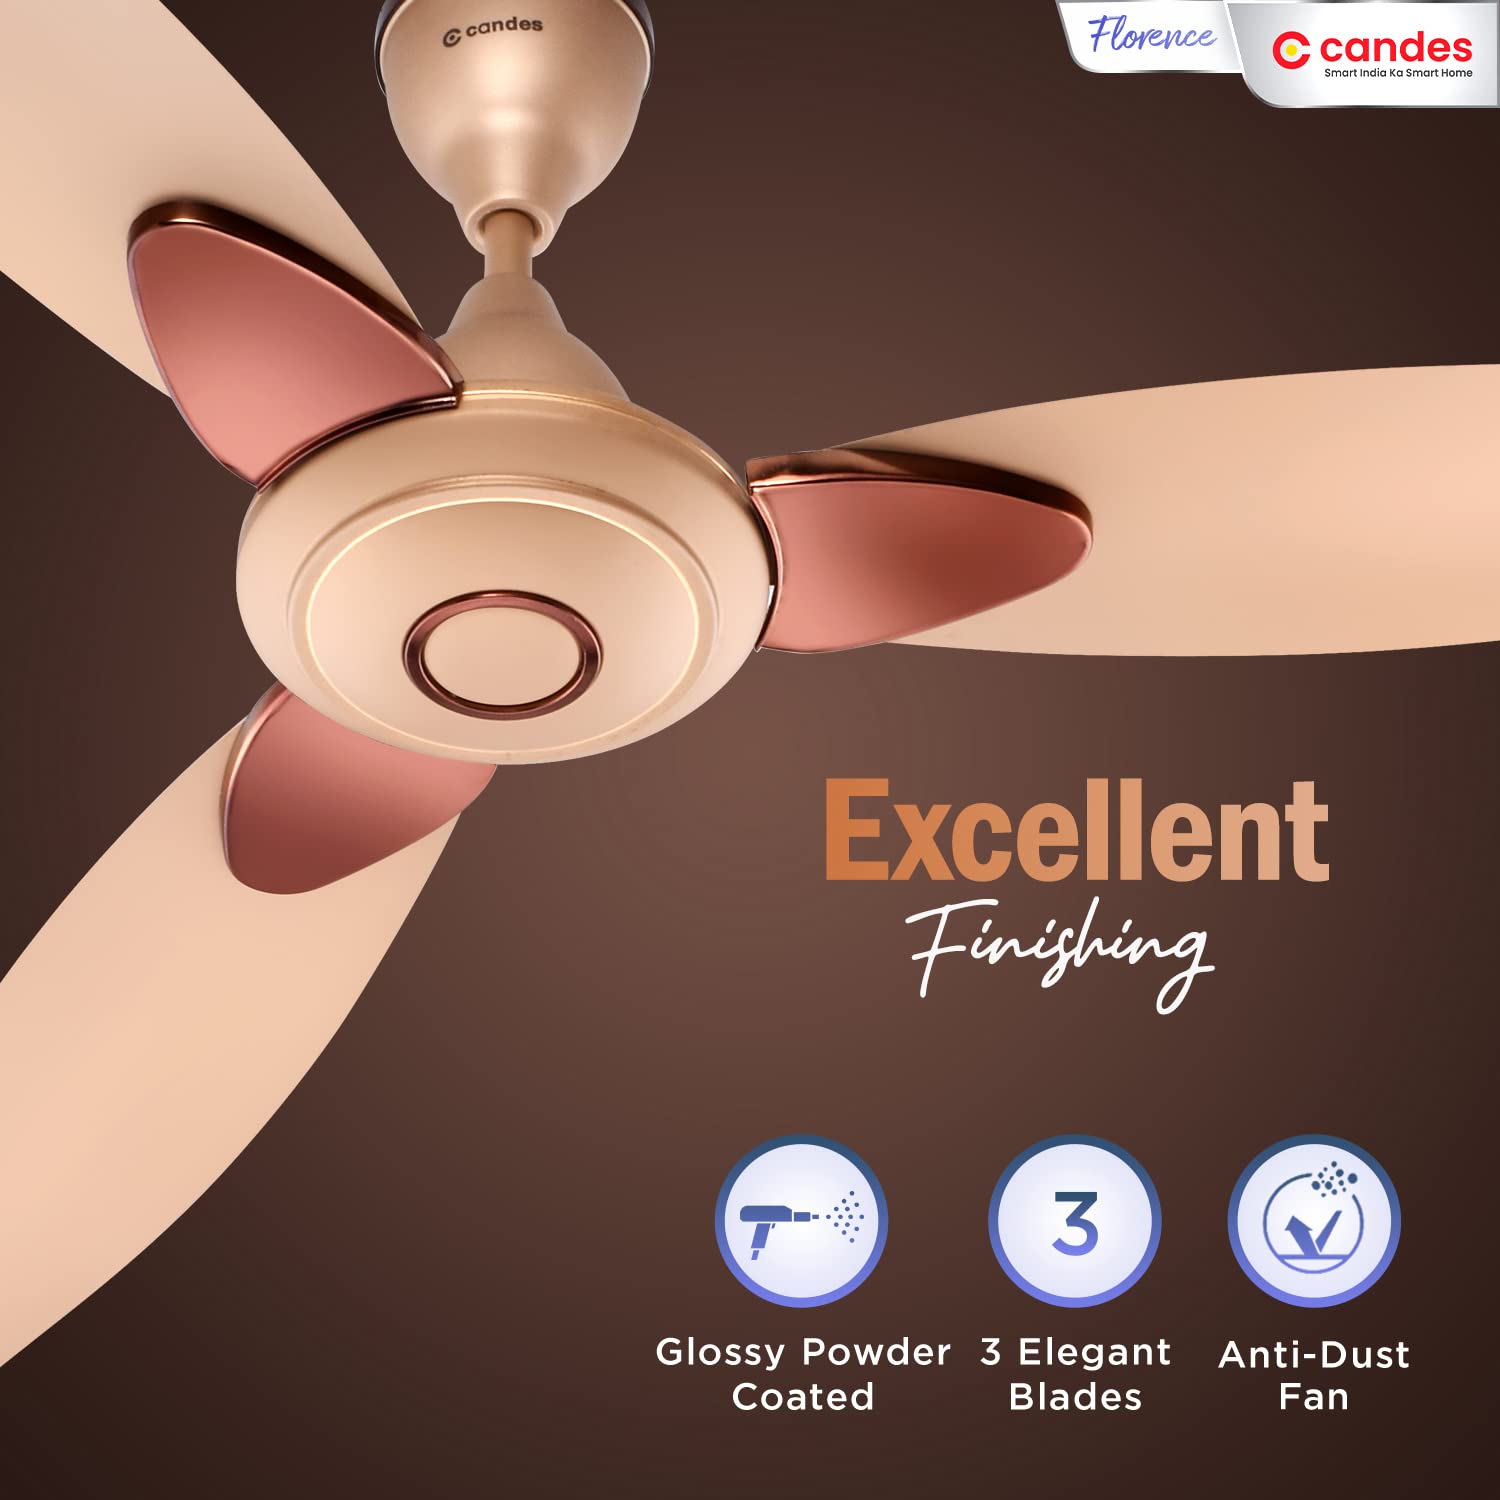 Candes Florence 1200mm/48 inch High Speed Anti-dust Decorative 3 Star Rated Ceiling Fan(100% CNC Winding) 405 RPM (2 Yrs Warranty) (Gold, Pack of 2)